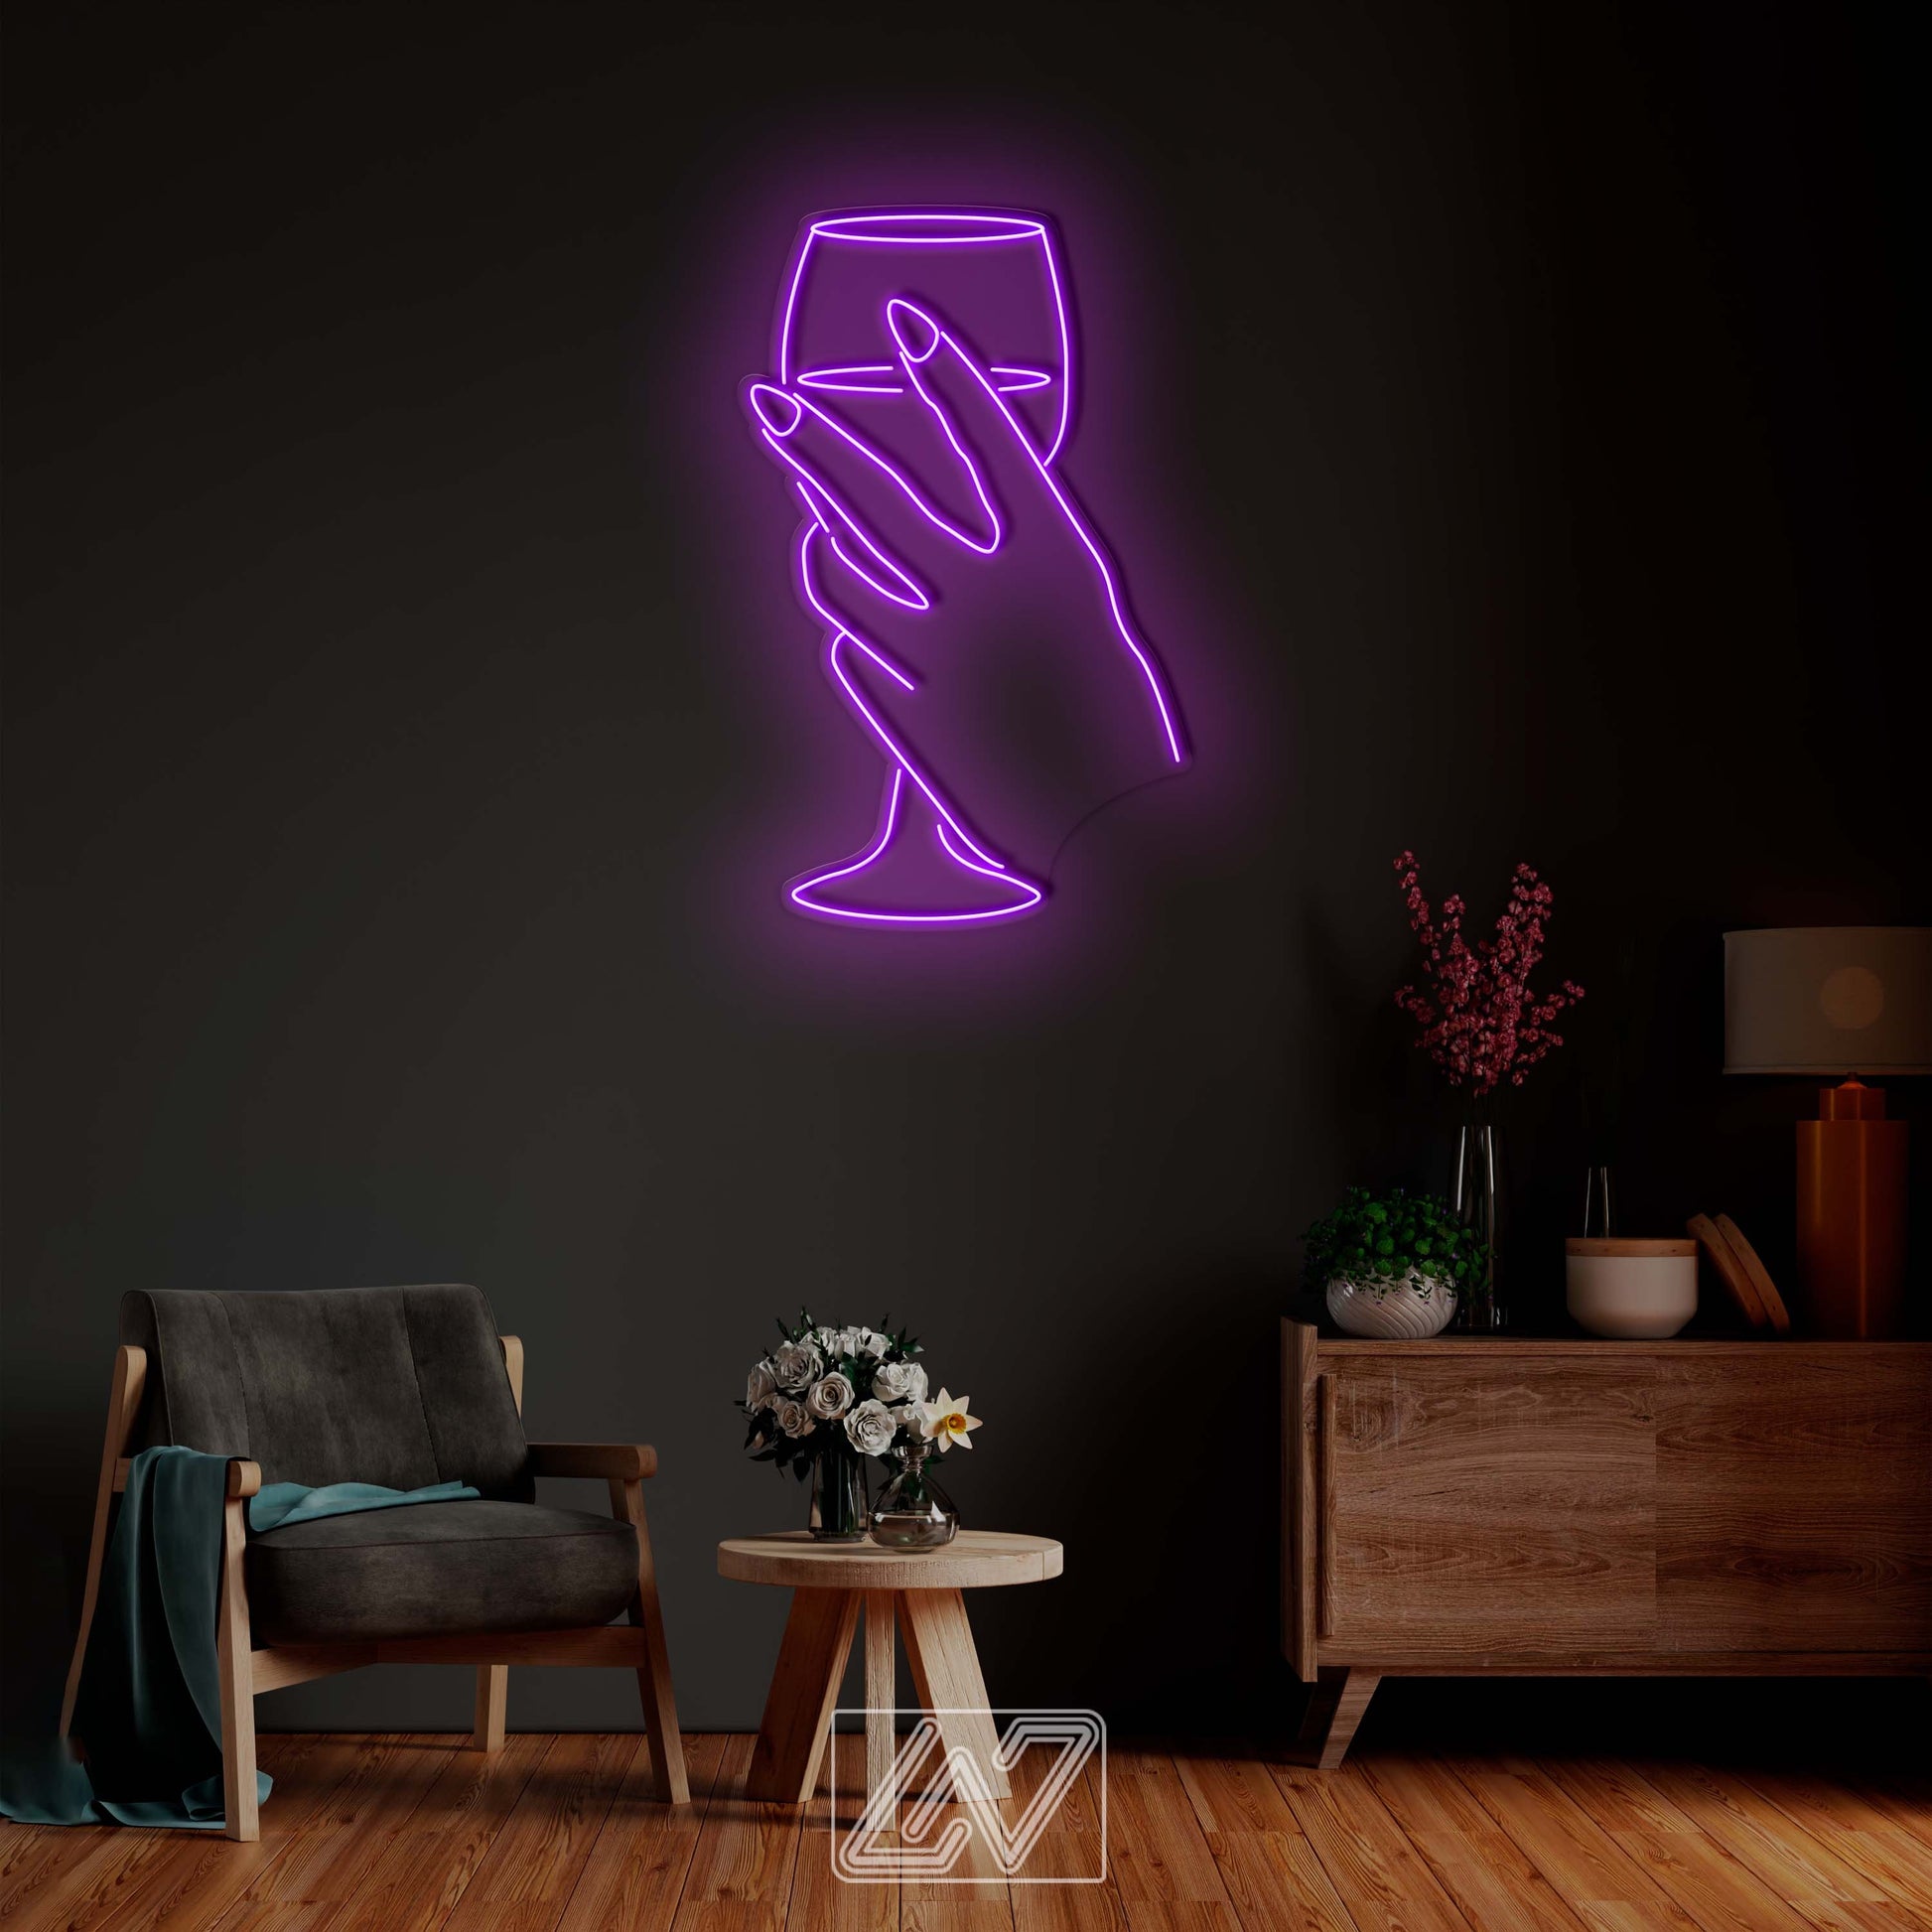 Glass of wine - LED Neon Sign,Hand neon sign, Custom Sexy Woman Decor,Wine Neon light sign, LED Lady Neon light Wedding Personalized romance